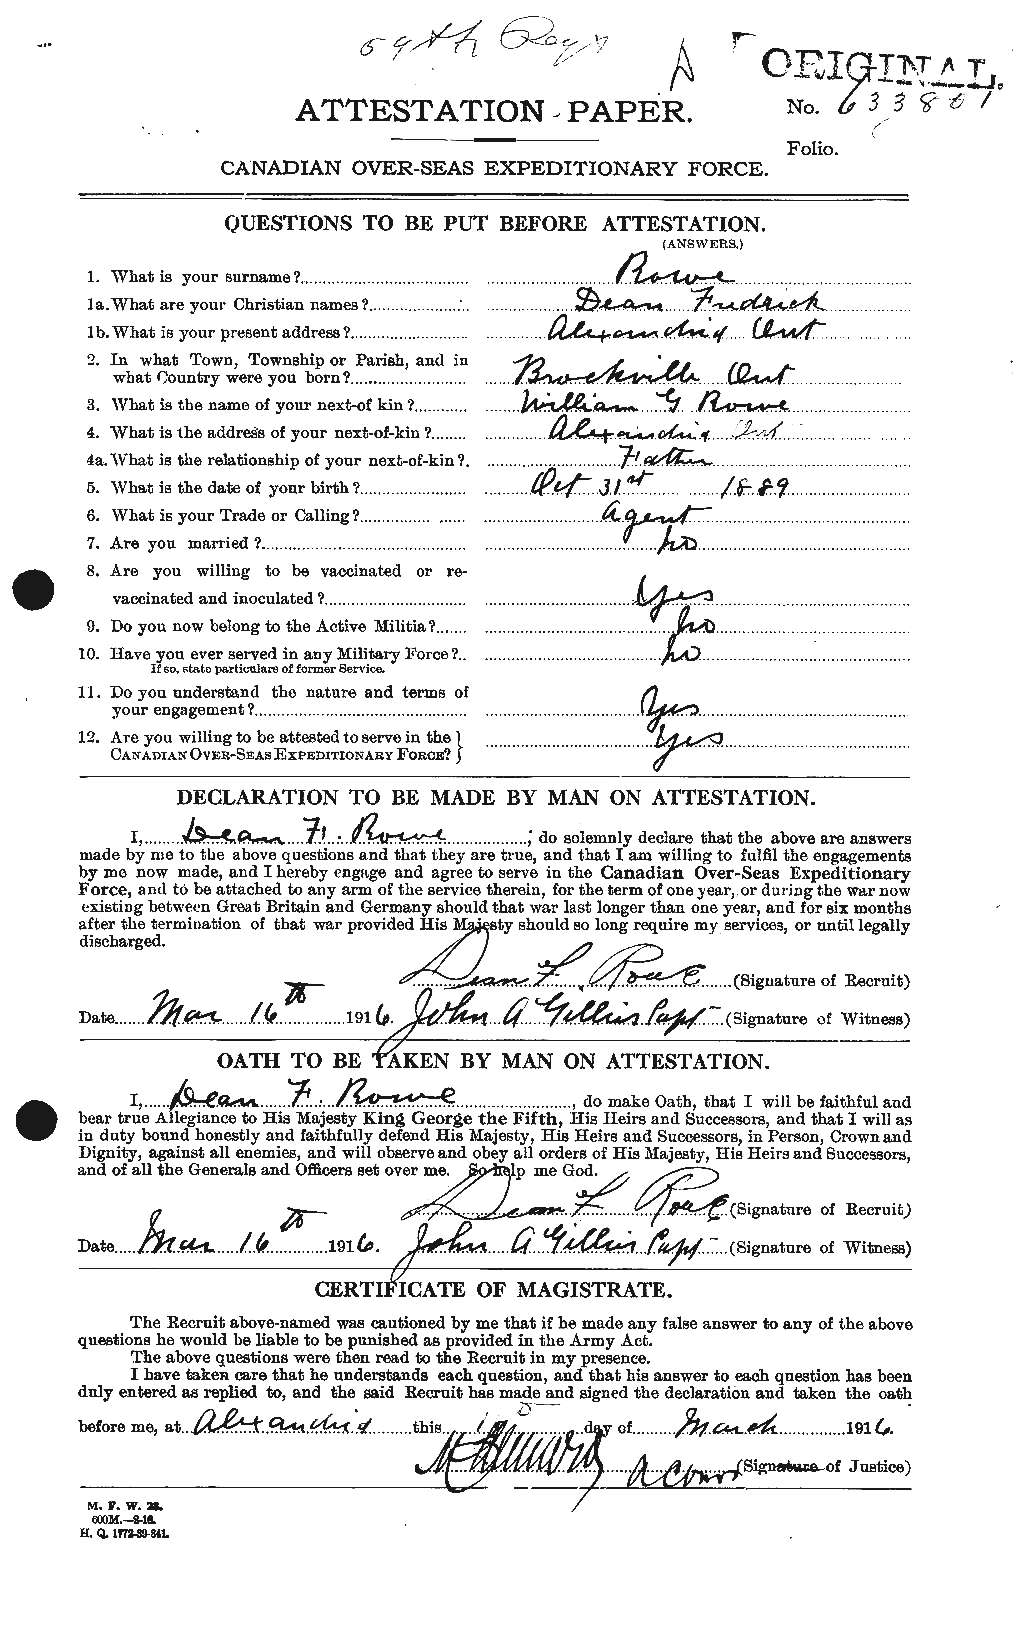 Personnel Records of the First World War - CEF 615829a